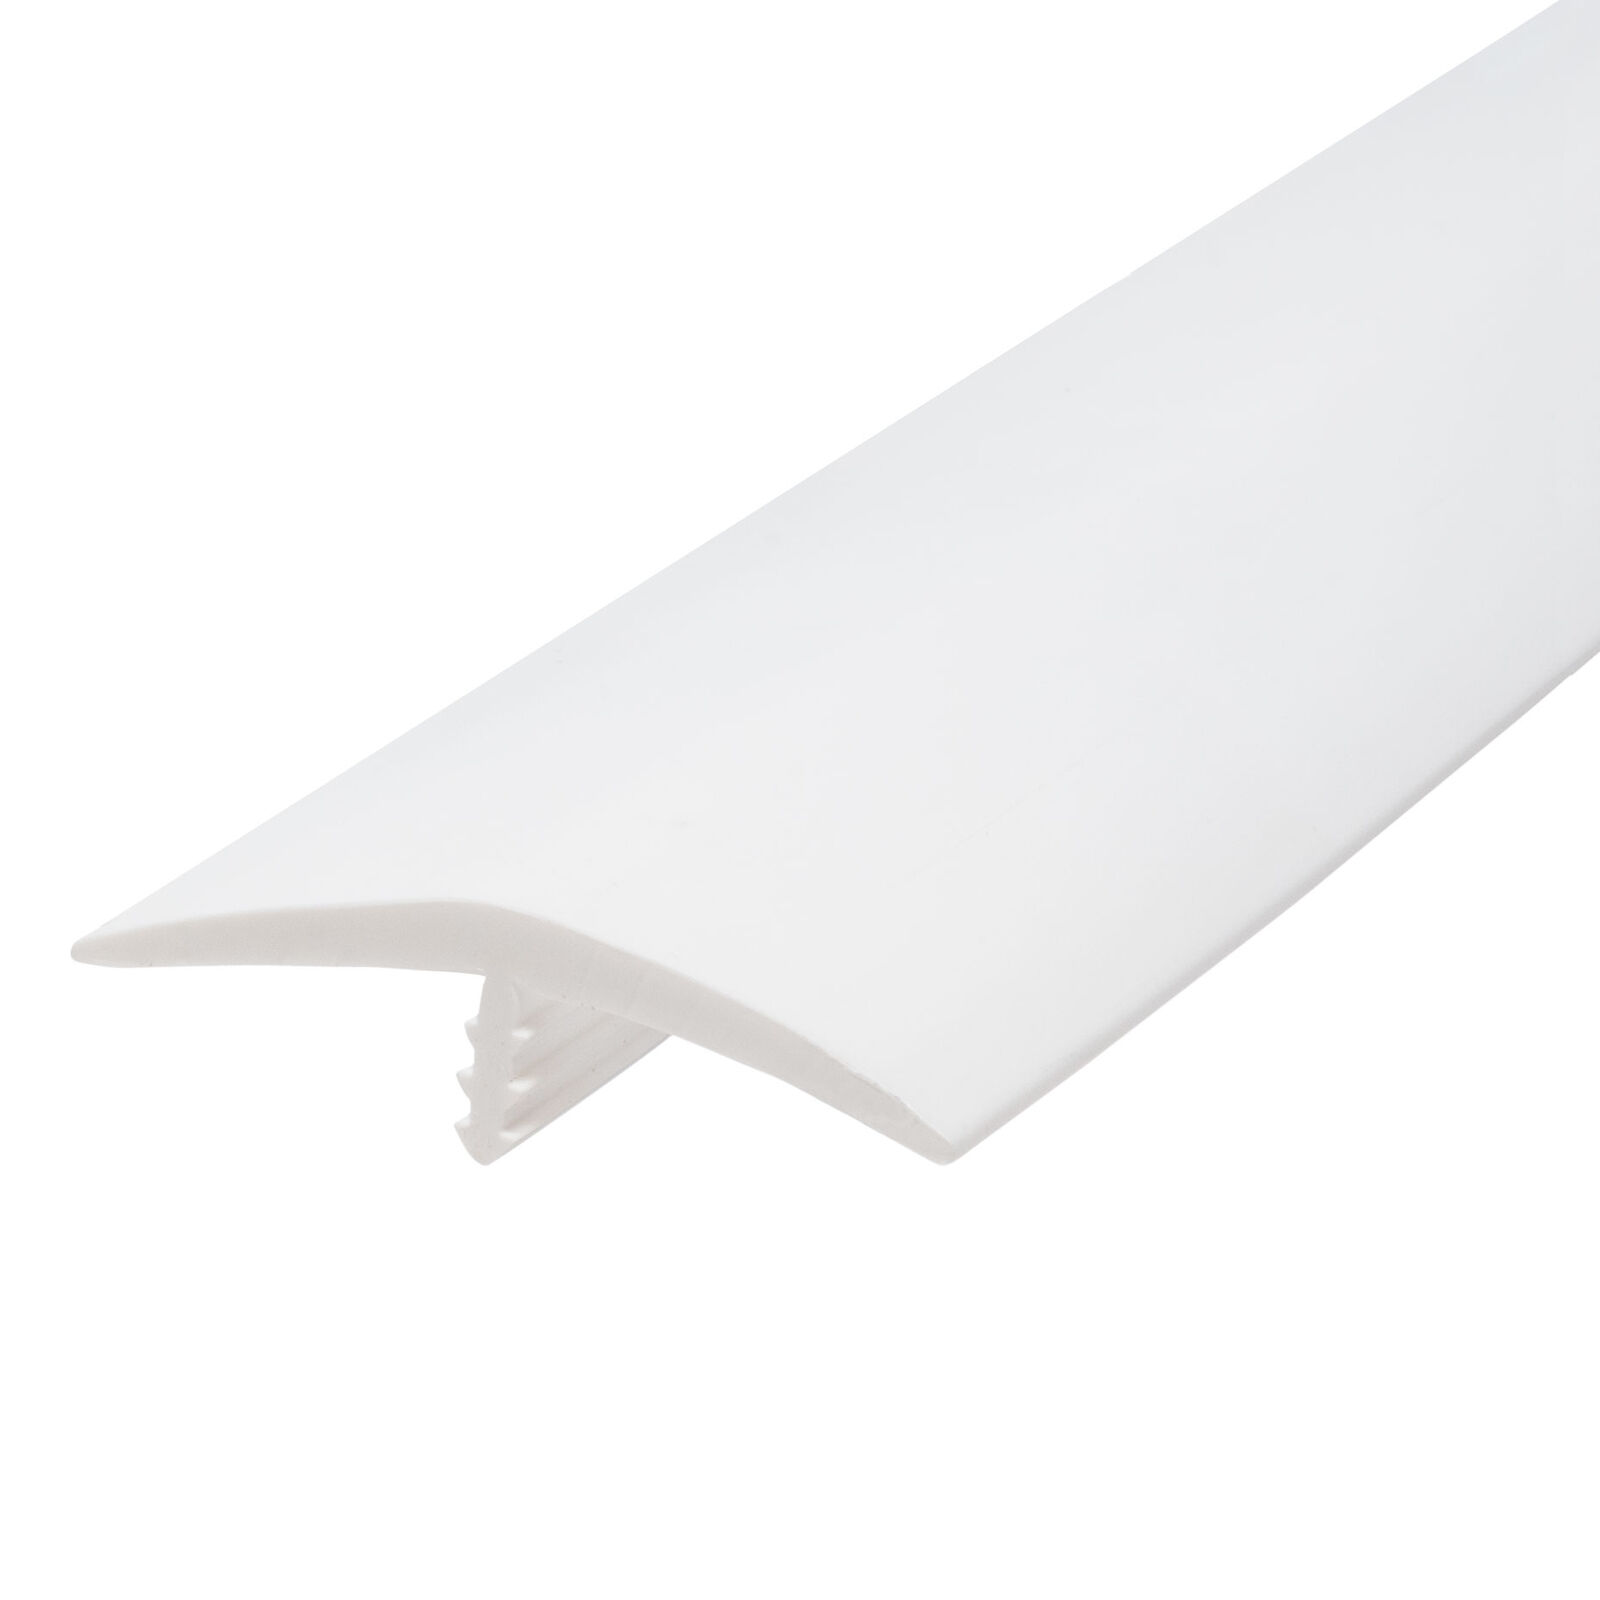 Outwater Plastic T-molding 2 Inch White Flexible Polyethylene Center Barb Tee